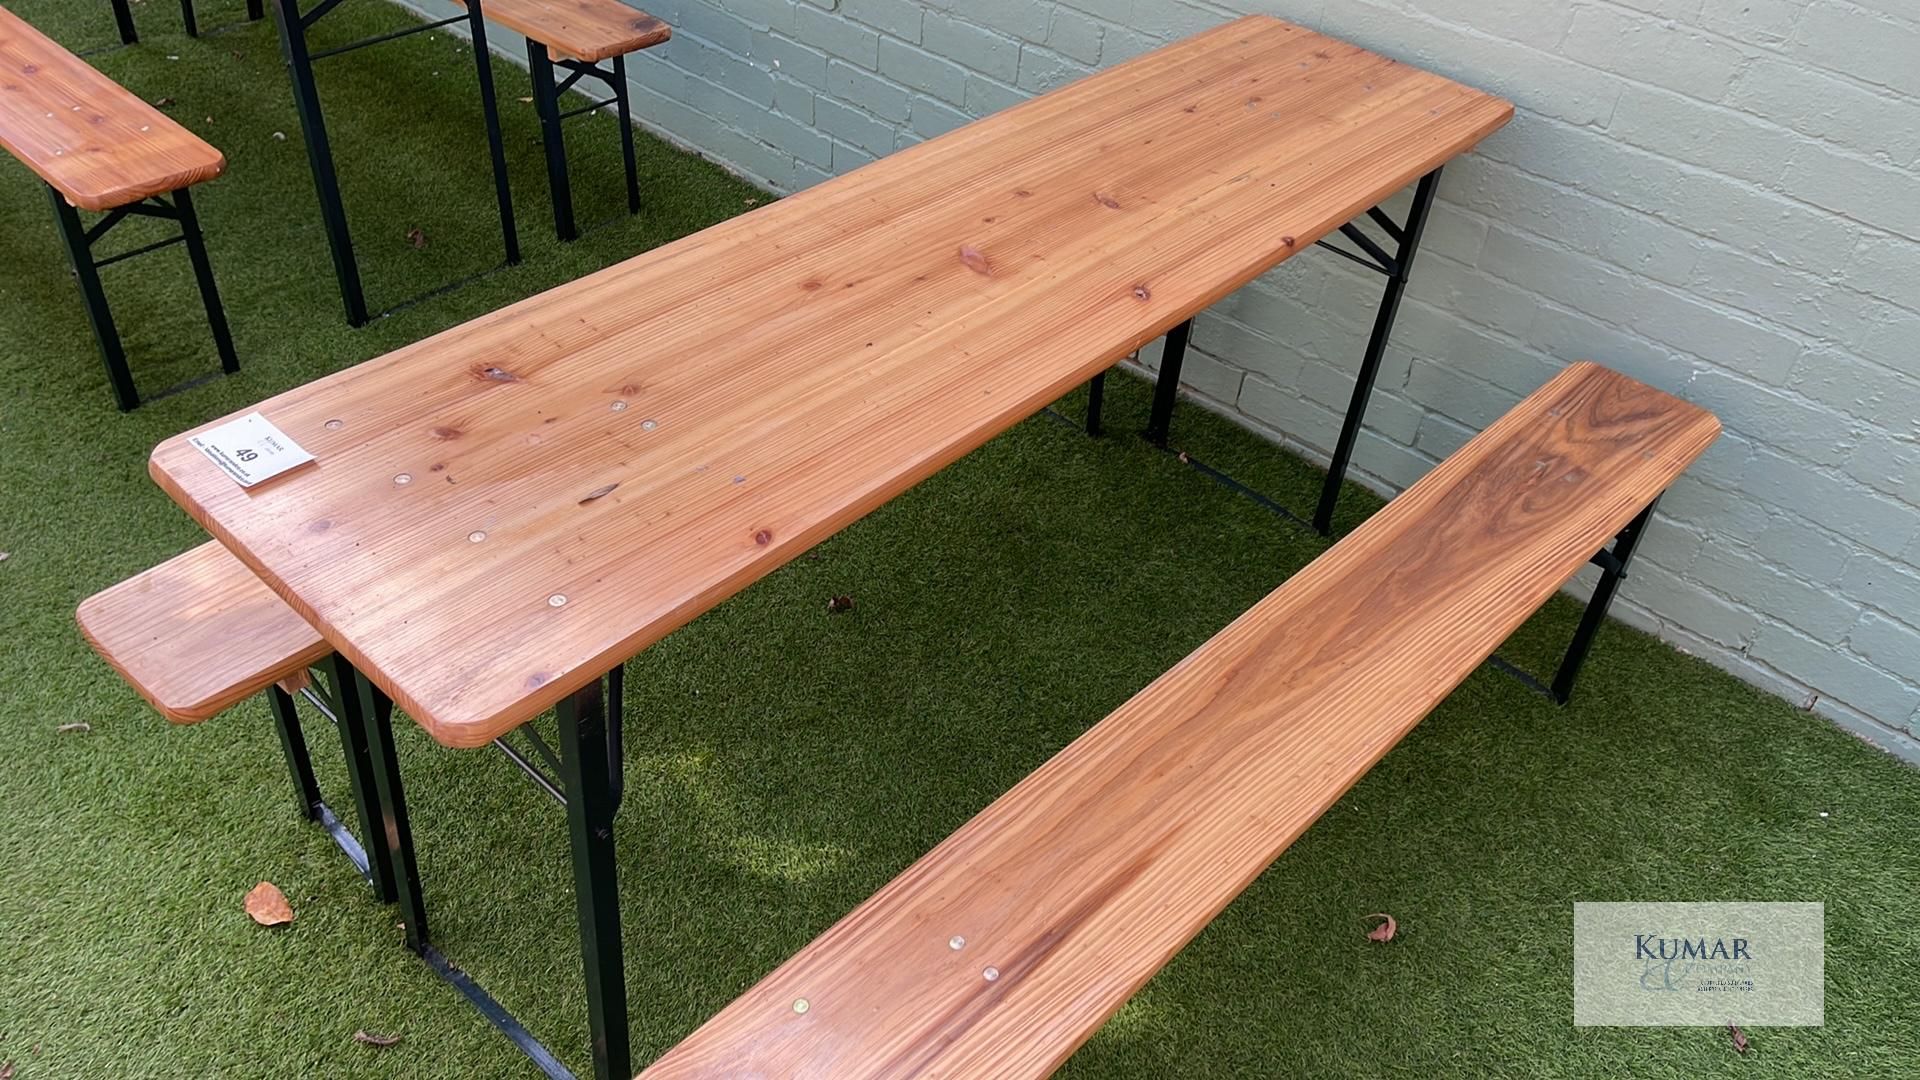 Wooden Top Metal Framed Outdoor Table with 2: Matching Benches - Dimensions Table L - 1780mm x W - - Image 4 of 4